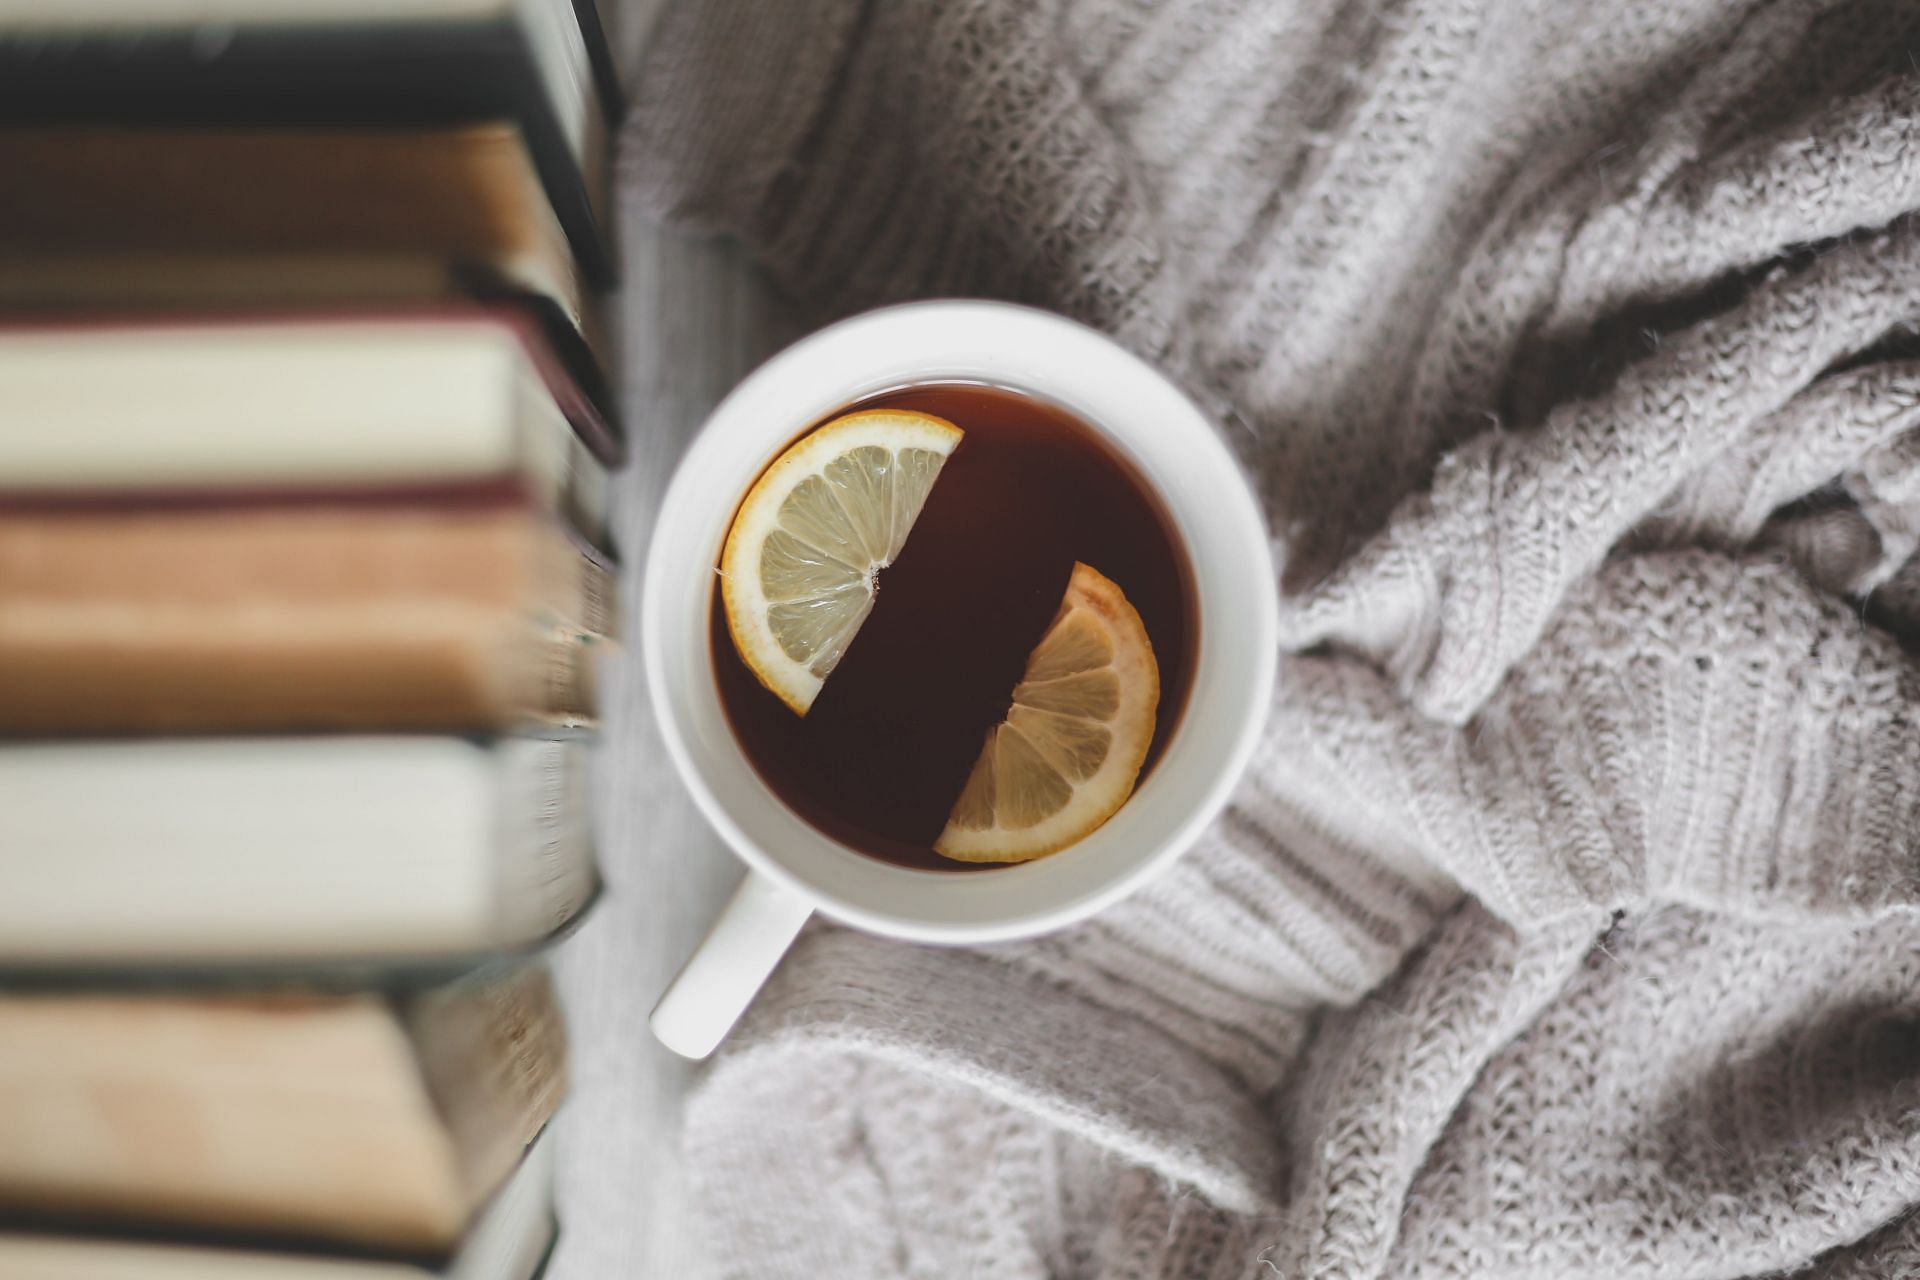 Peppermint tea as one of the stress-relief teas. (image sourced via Pexels / Photo by Dana)